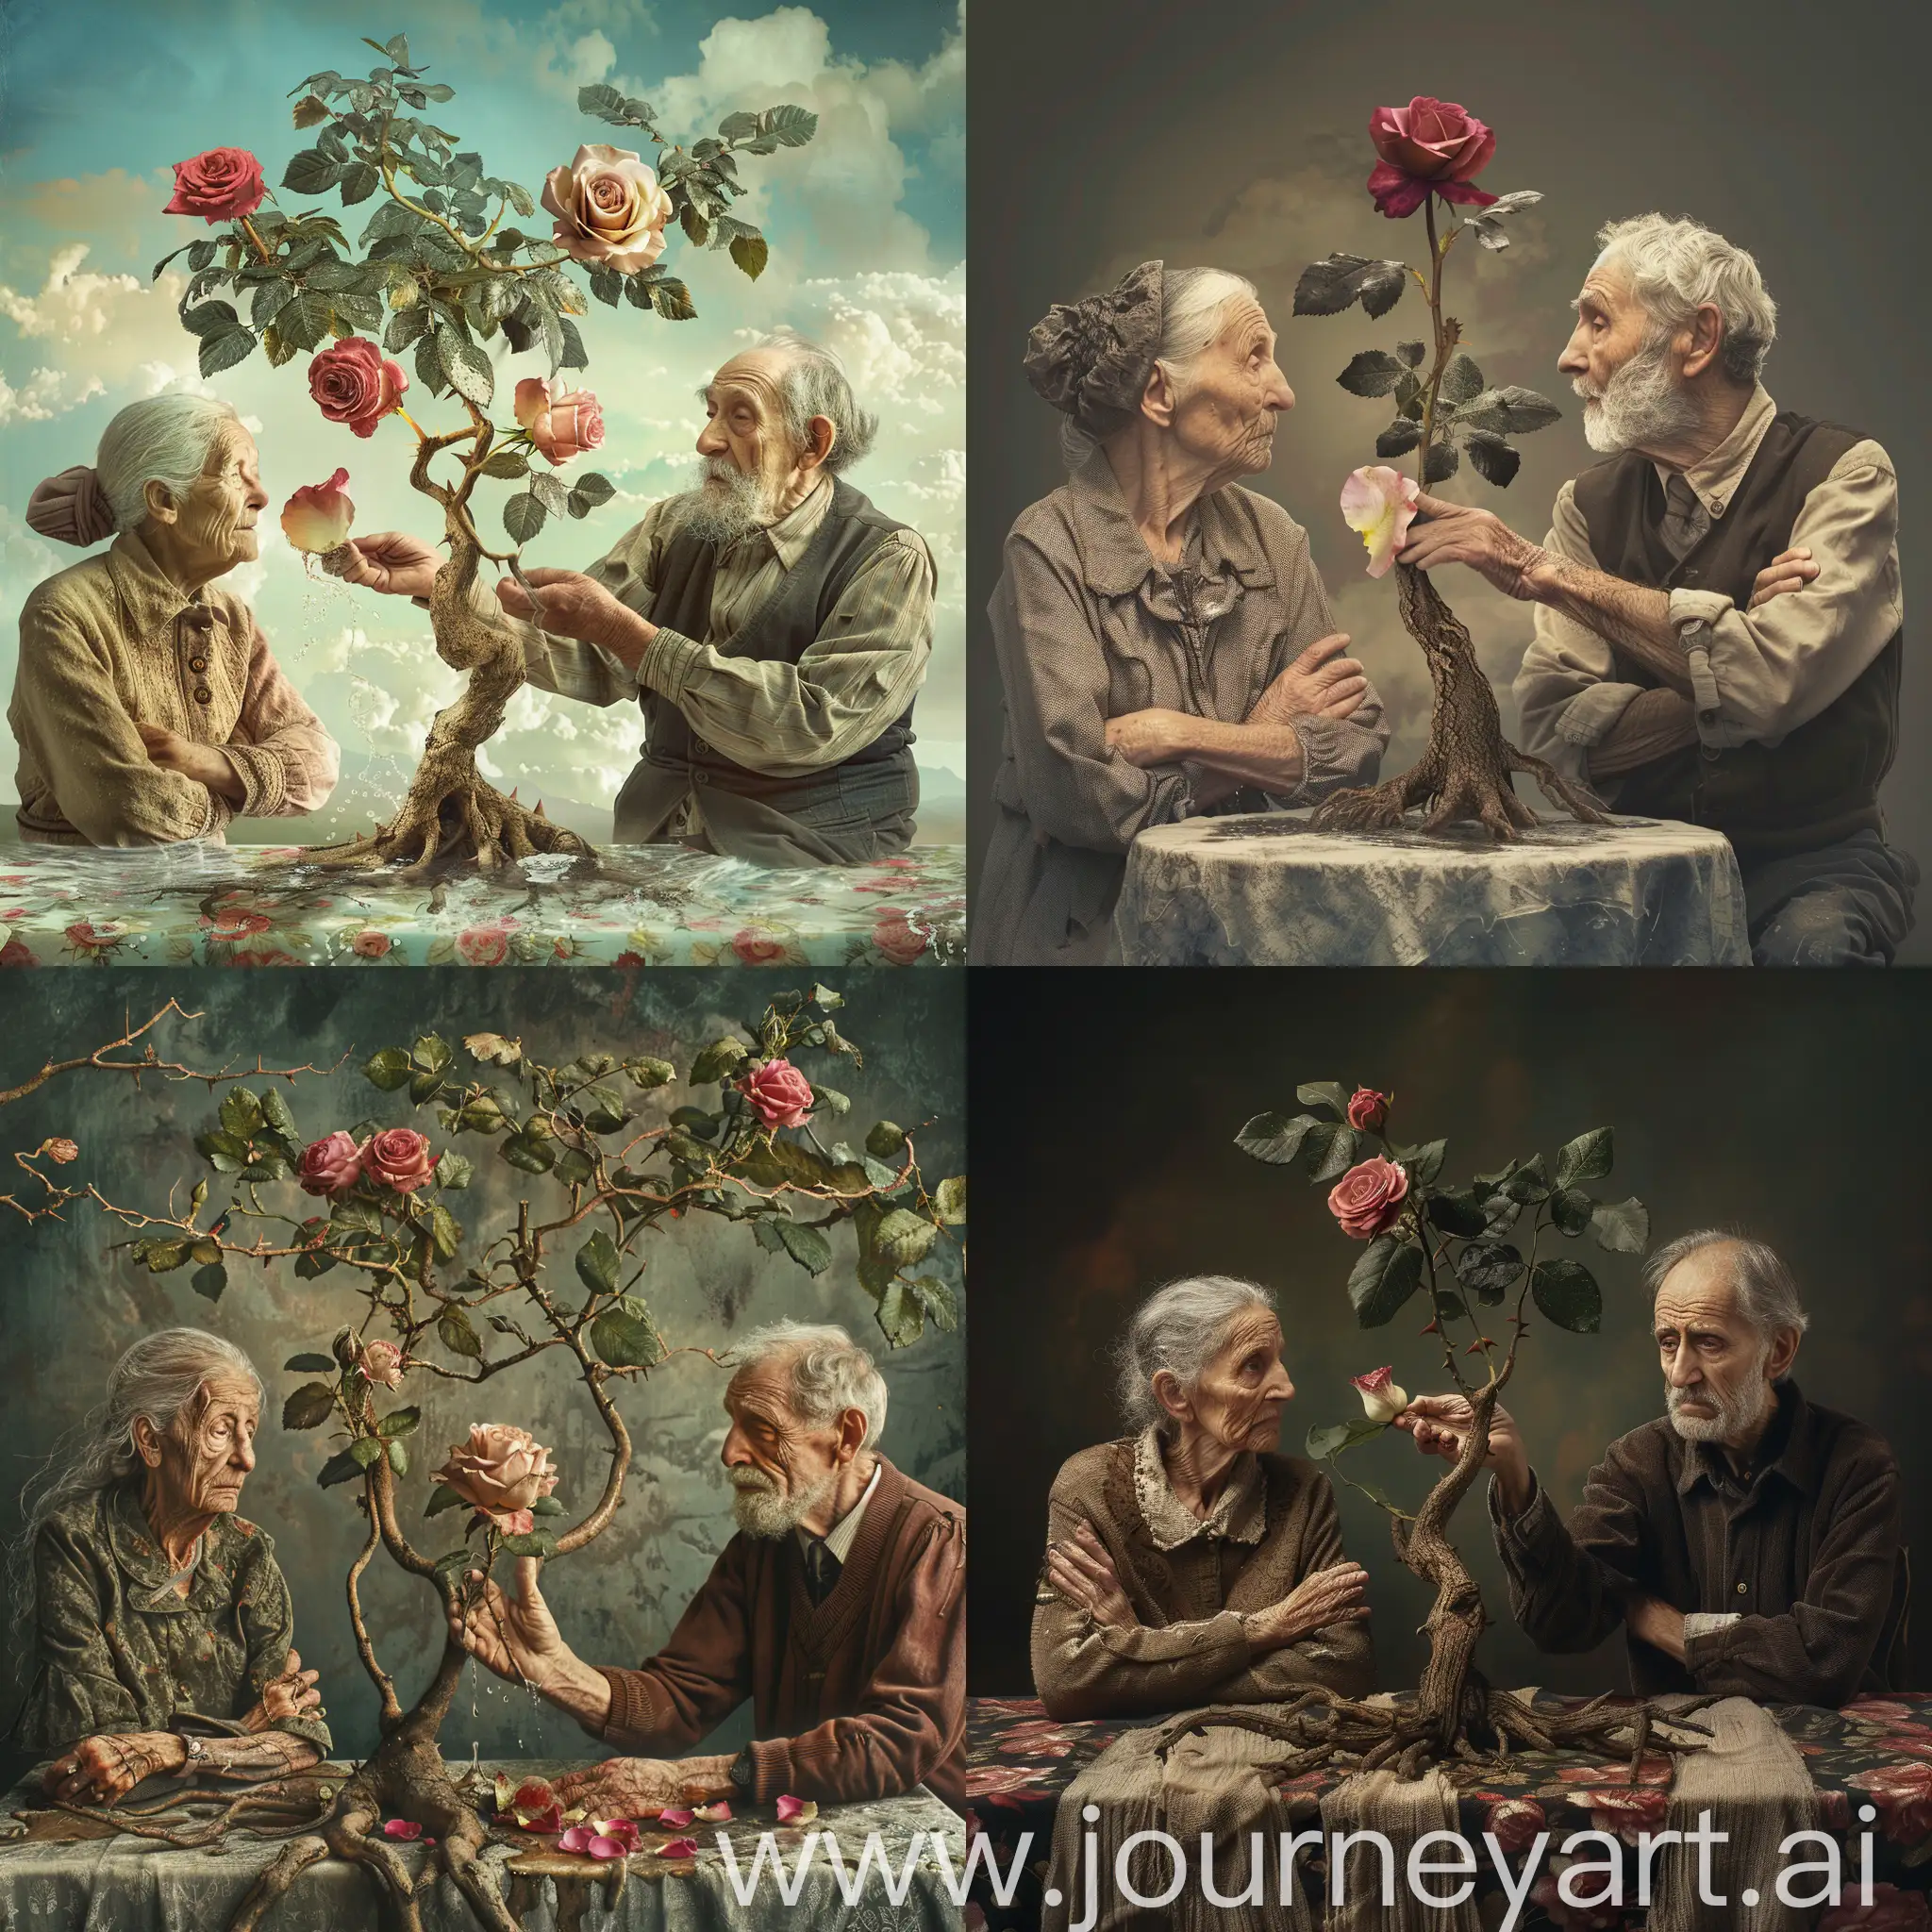 Elderly-Couple-Reflecting-with-Wilting-Rose-Man-Offers-New-Bloom